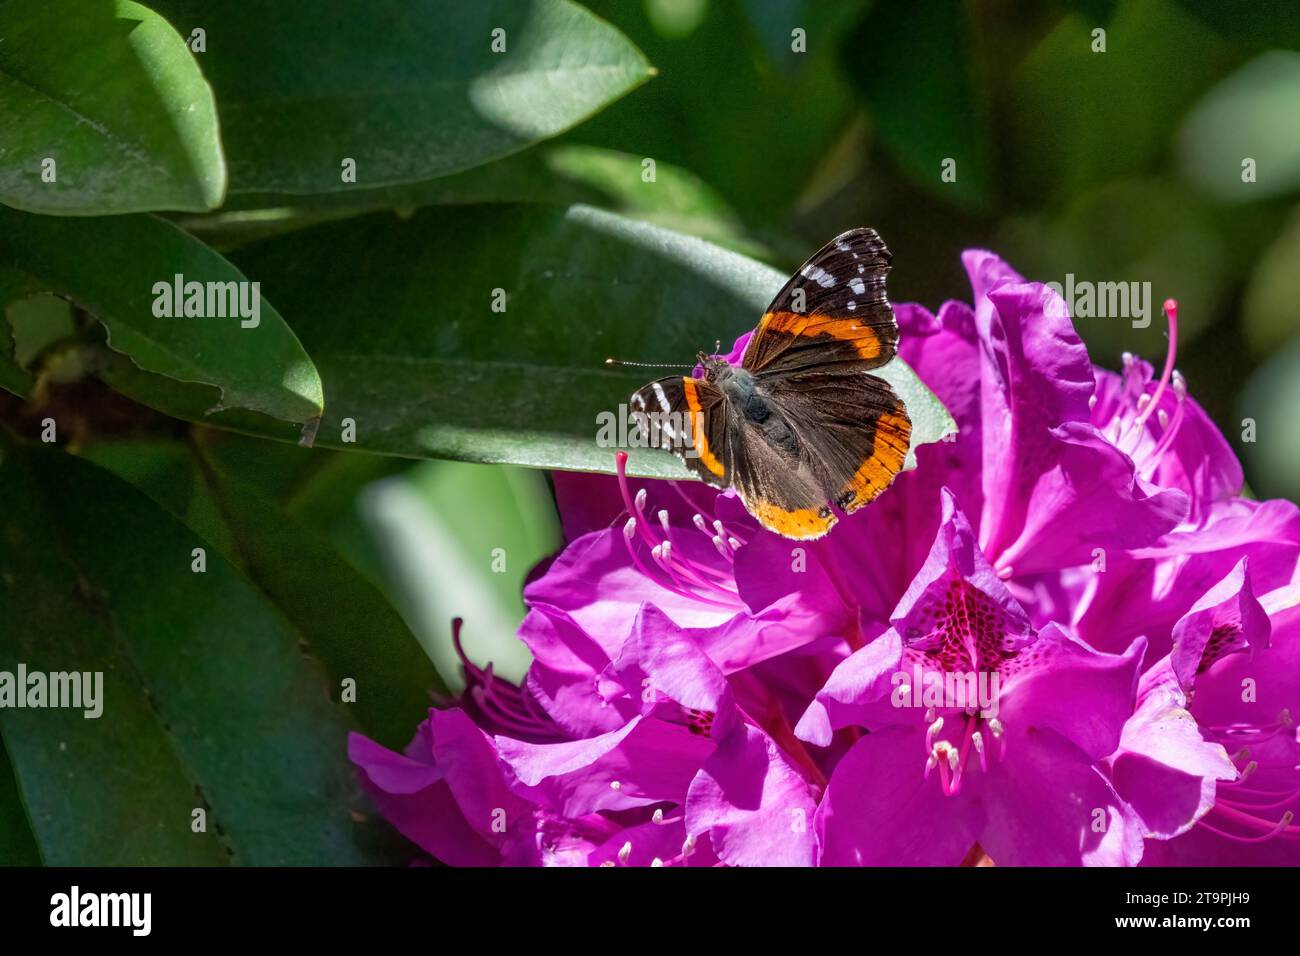 Issaquah, Washington, USA.   Red Admiral butterfly on a Pacific Rhododendron in bloom. Stock Photo